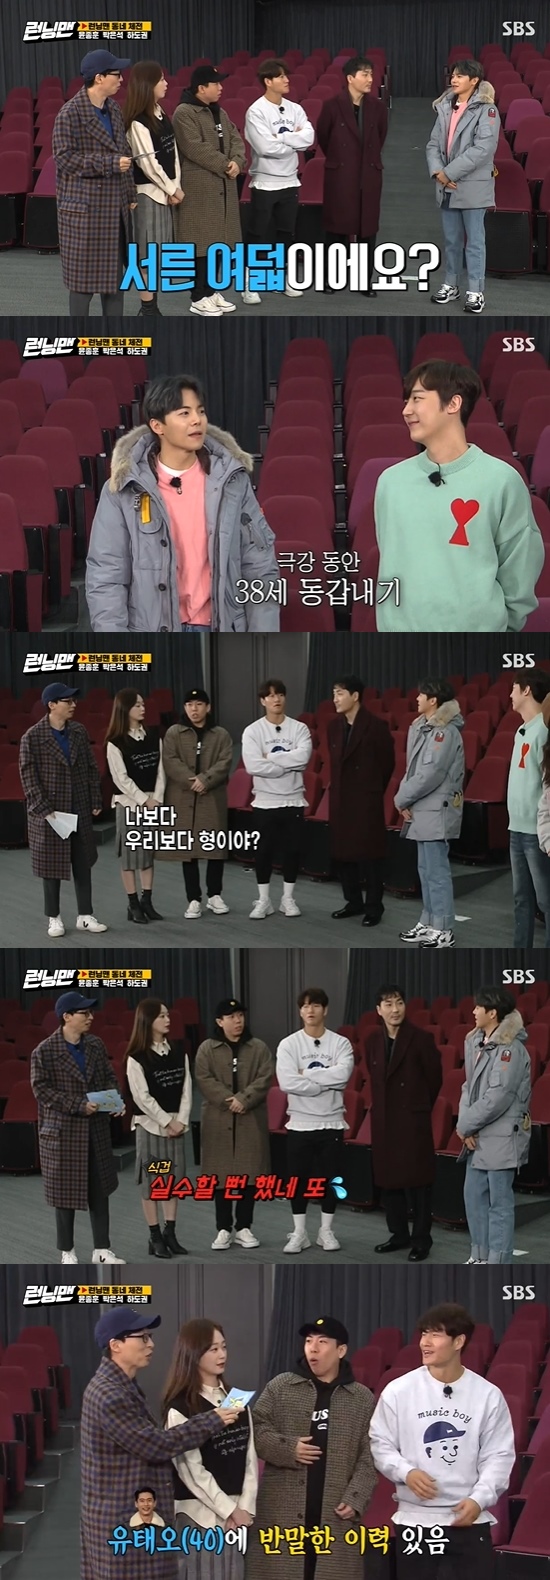 Running Man Yoo Jae-Suk surprised by Lookism during Park Eun-sukOn the 14th, SBS Good Sunday - Running Man appeared in Pent House three people, Yoon Jong-hoon, Hadokwon, and Park Eun-suk.On the day, Yoon Jong-hoon said he had a relationship with Song Ji-hyo; Yoon Jong-hoon said, Seven years or so?He said he appeared in the drama with Song Ji-hyo around 2014.Yoo Jae-Suk, who saw this, laughed, saying, Those who have a relationship with Ji Hyo are always out and are really awkward.I think Ji Hyo doesnt remember well, Yoo Jae-Suk said, but Song Ji-hyo said, No, I know. Seven years ago, she shared Emergency Men and Women.Yoo Jae-Suk said, I was surprised to see Mr. Eun Seoks age. Park Eun-suk asked Park Eun-suk, Are you 38 years old? Park Eun-suk said, Jong Hoon and same age.Yang recalled a mistake that he had made to Yoo Tae-oh in the past, saying, Is it more brother than us? I almost made a mistake again? The members told Ji Seok-jin, This is the time.That brother is only for the shell, he said.Photo = SBS Broadcasting Screen